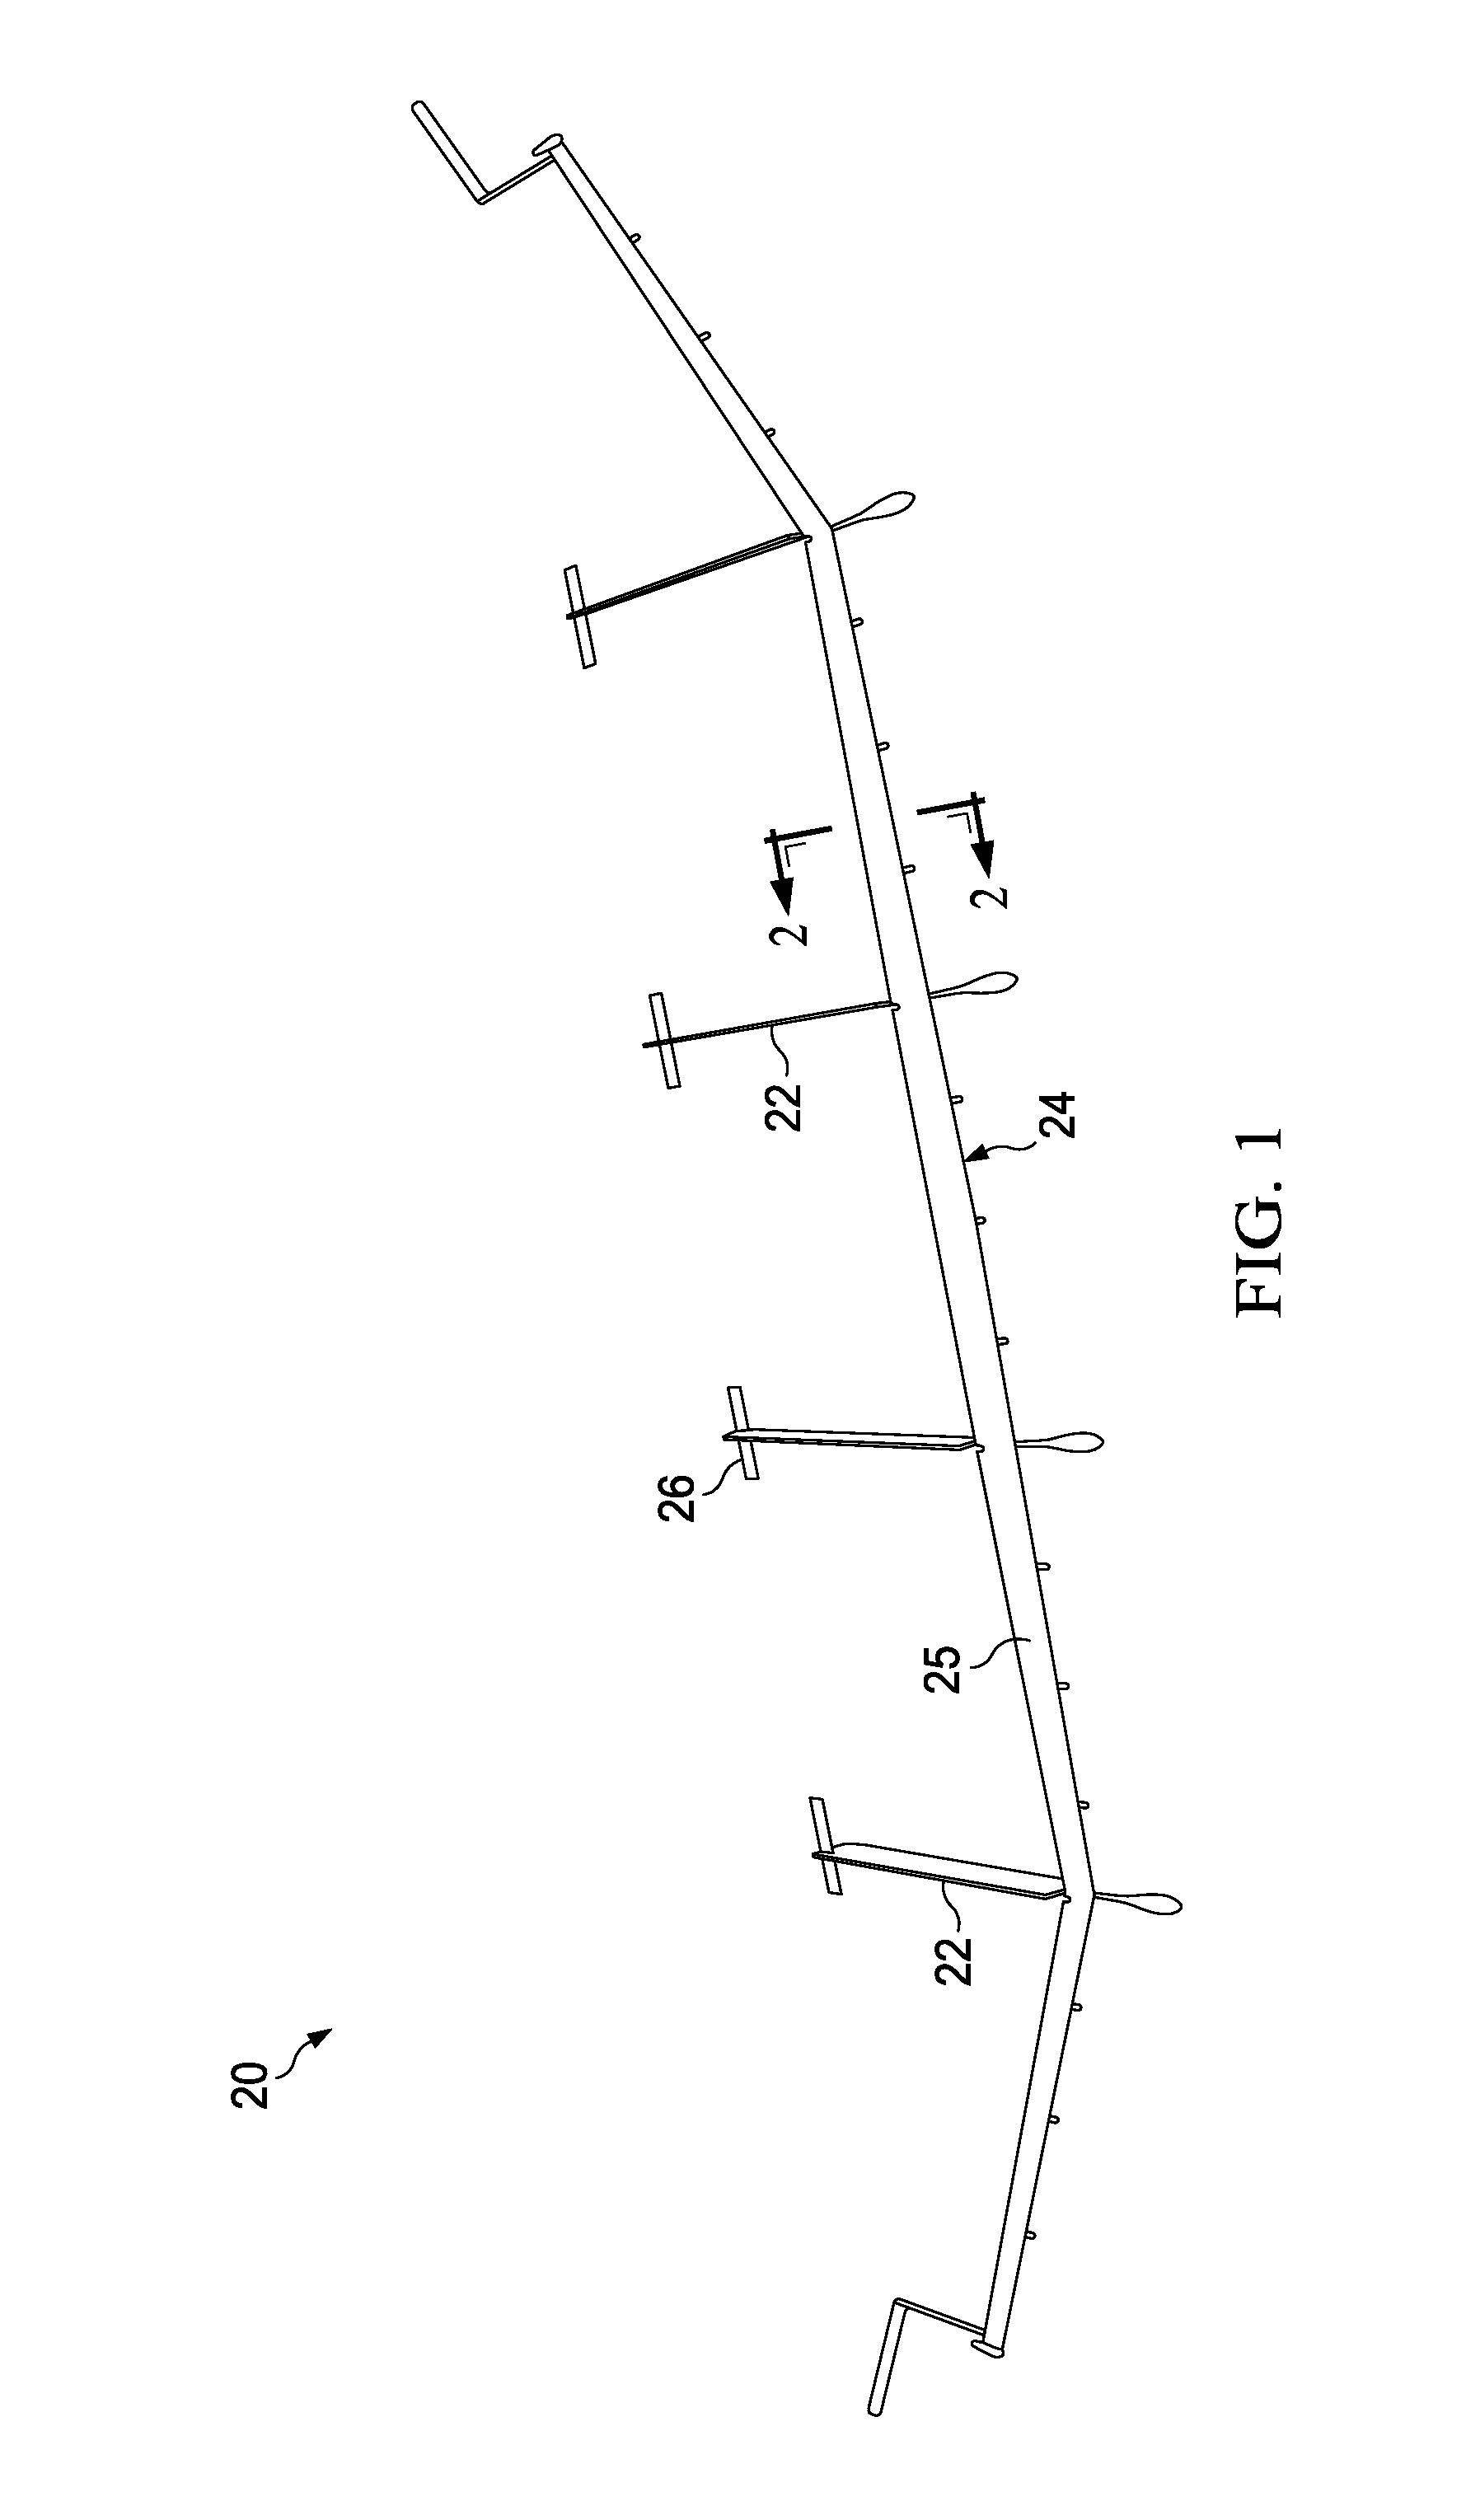 Attachment of aircraft ribs to spars having variable geometry